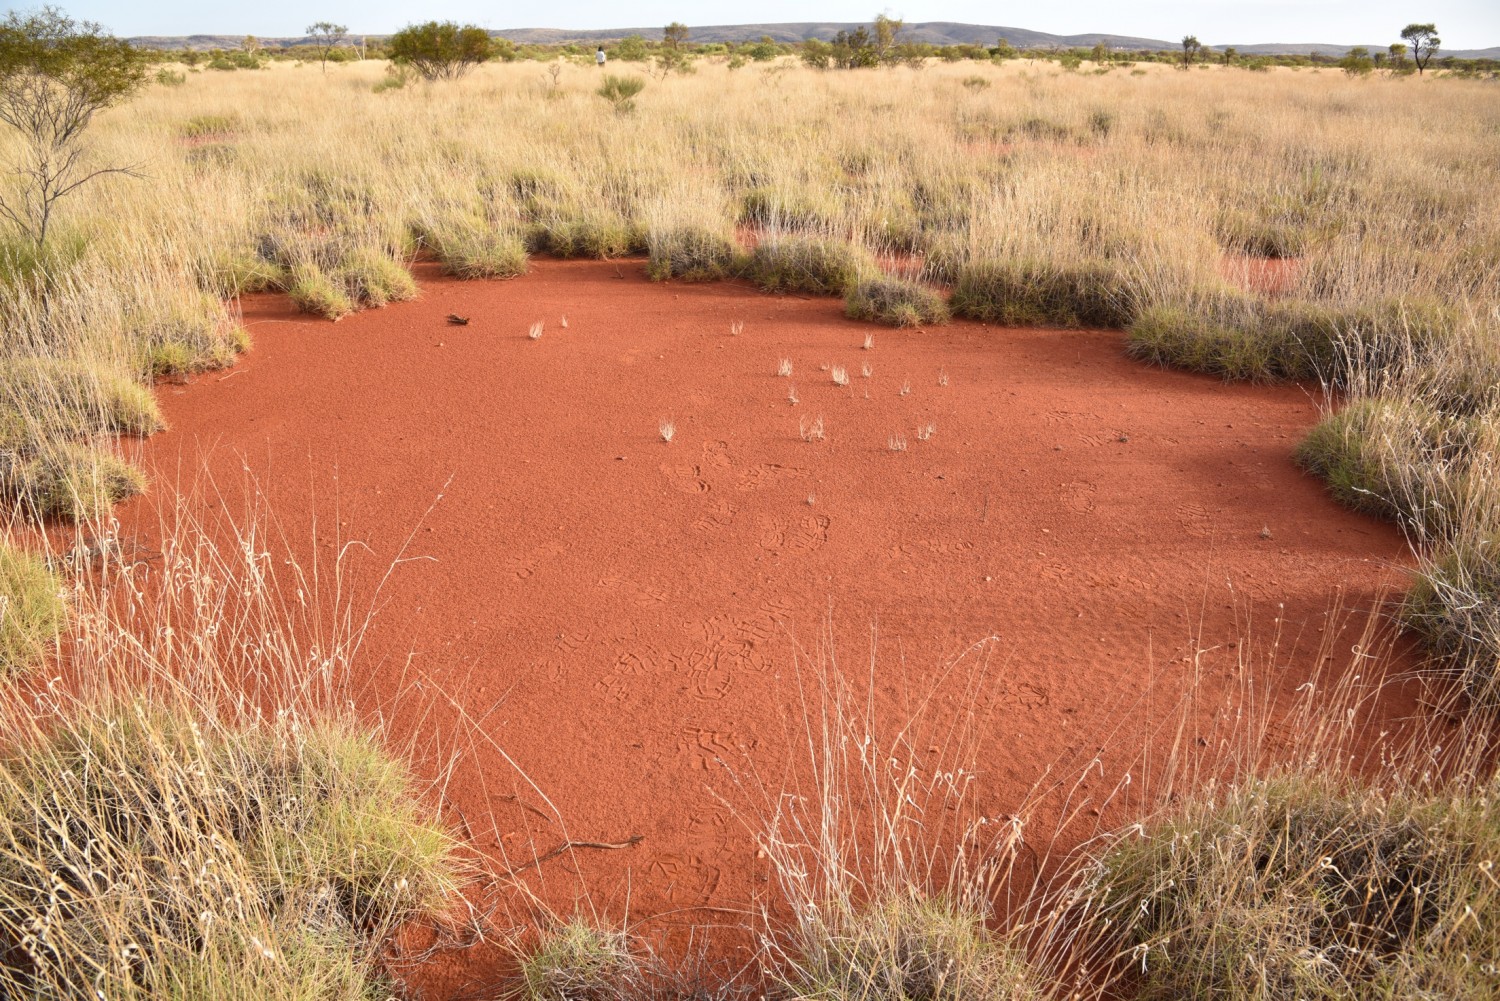 Latest Discovery Hints at Origin of Mysterious 'Fairy Circles' - ABC News